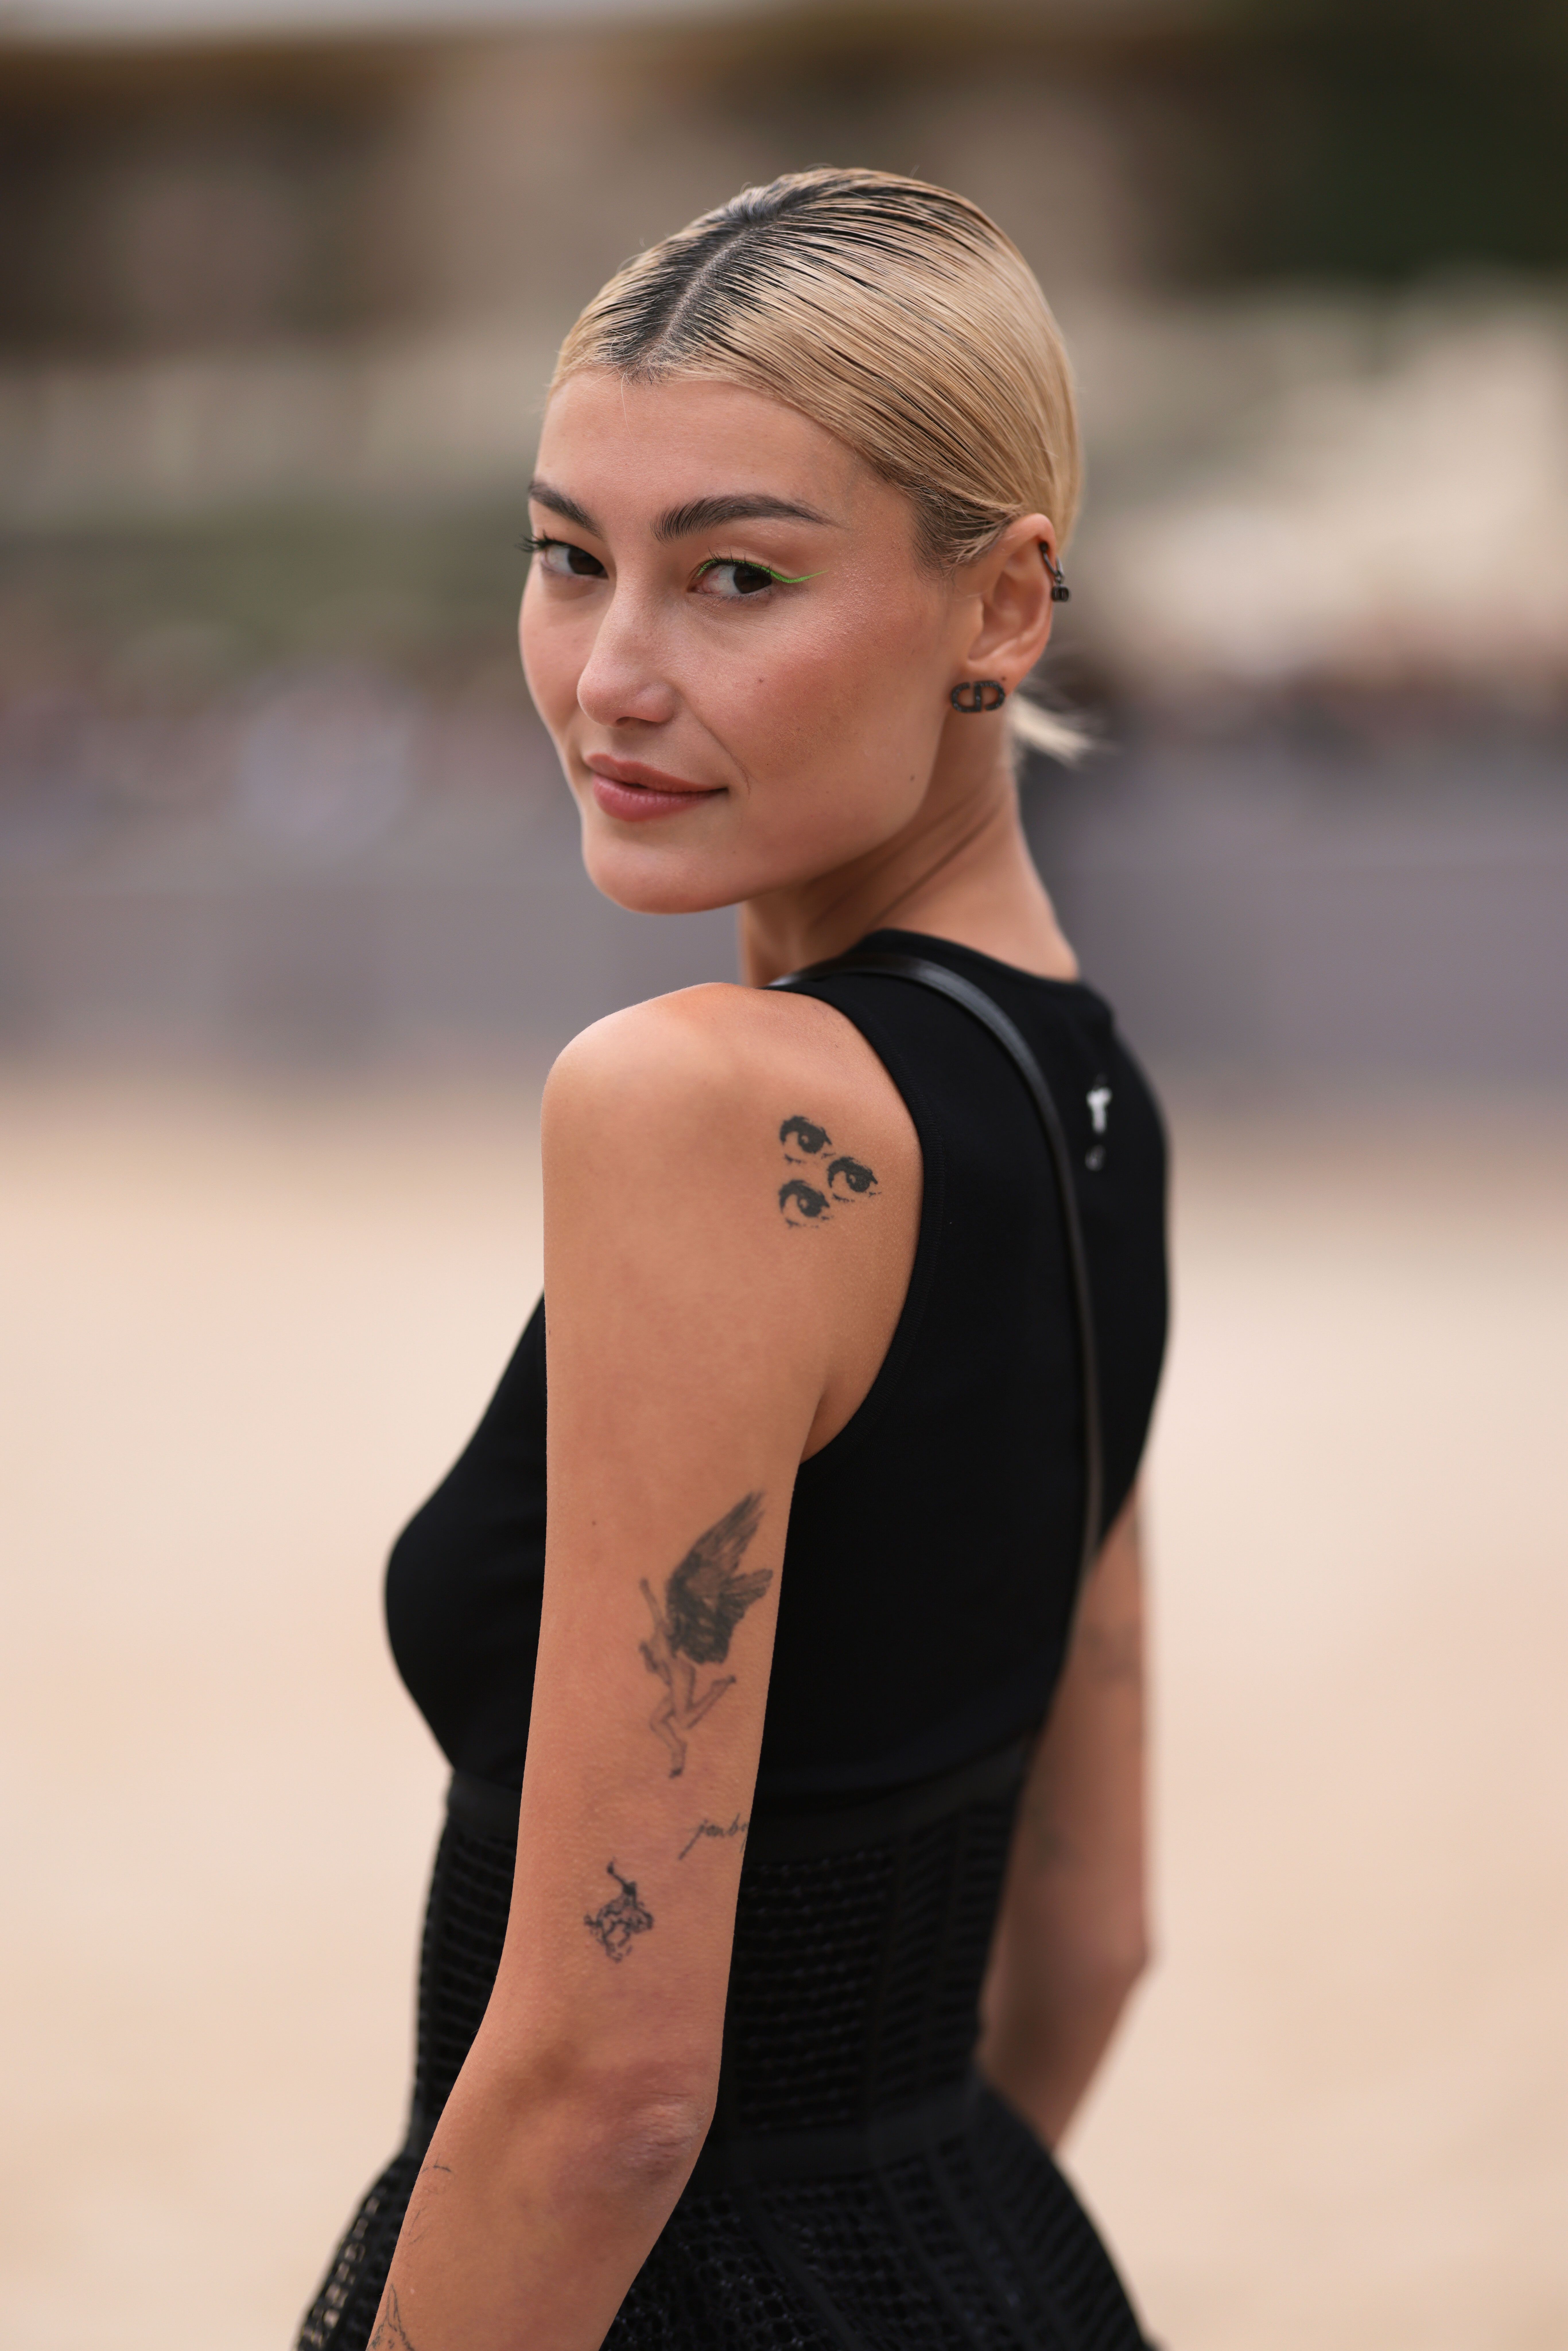 15 Completely Logical Reasons Why You Should Date A Girl With Tattoos